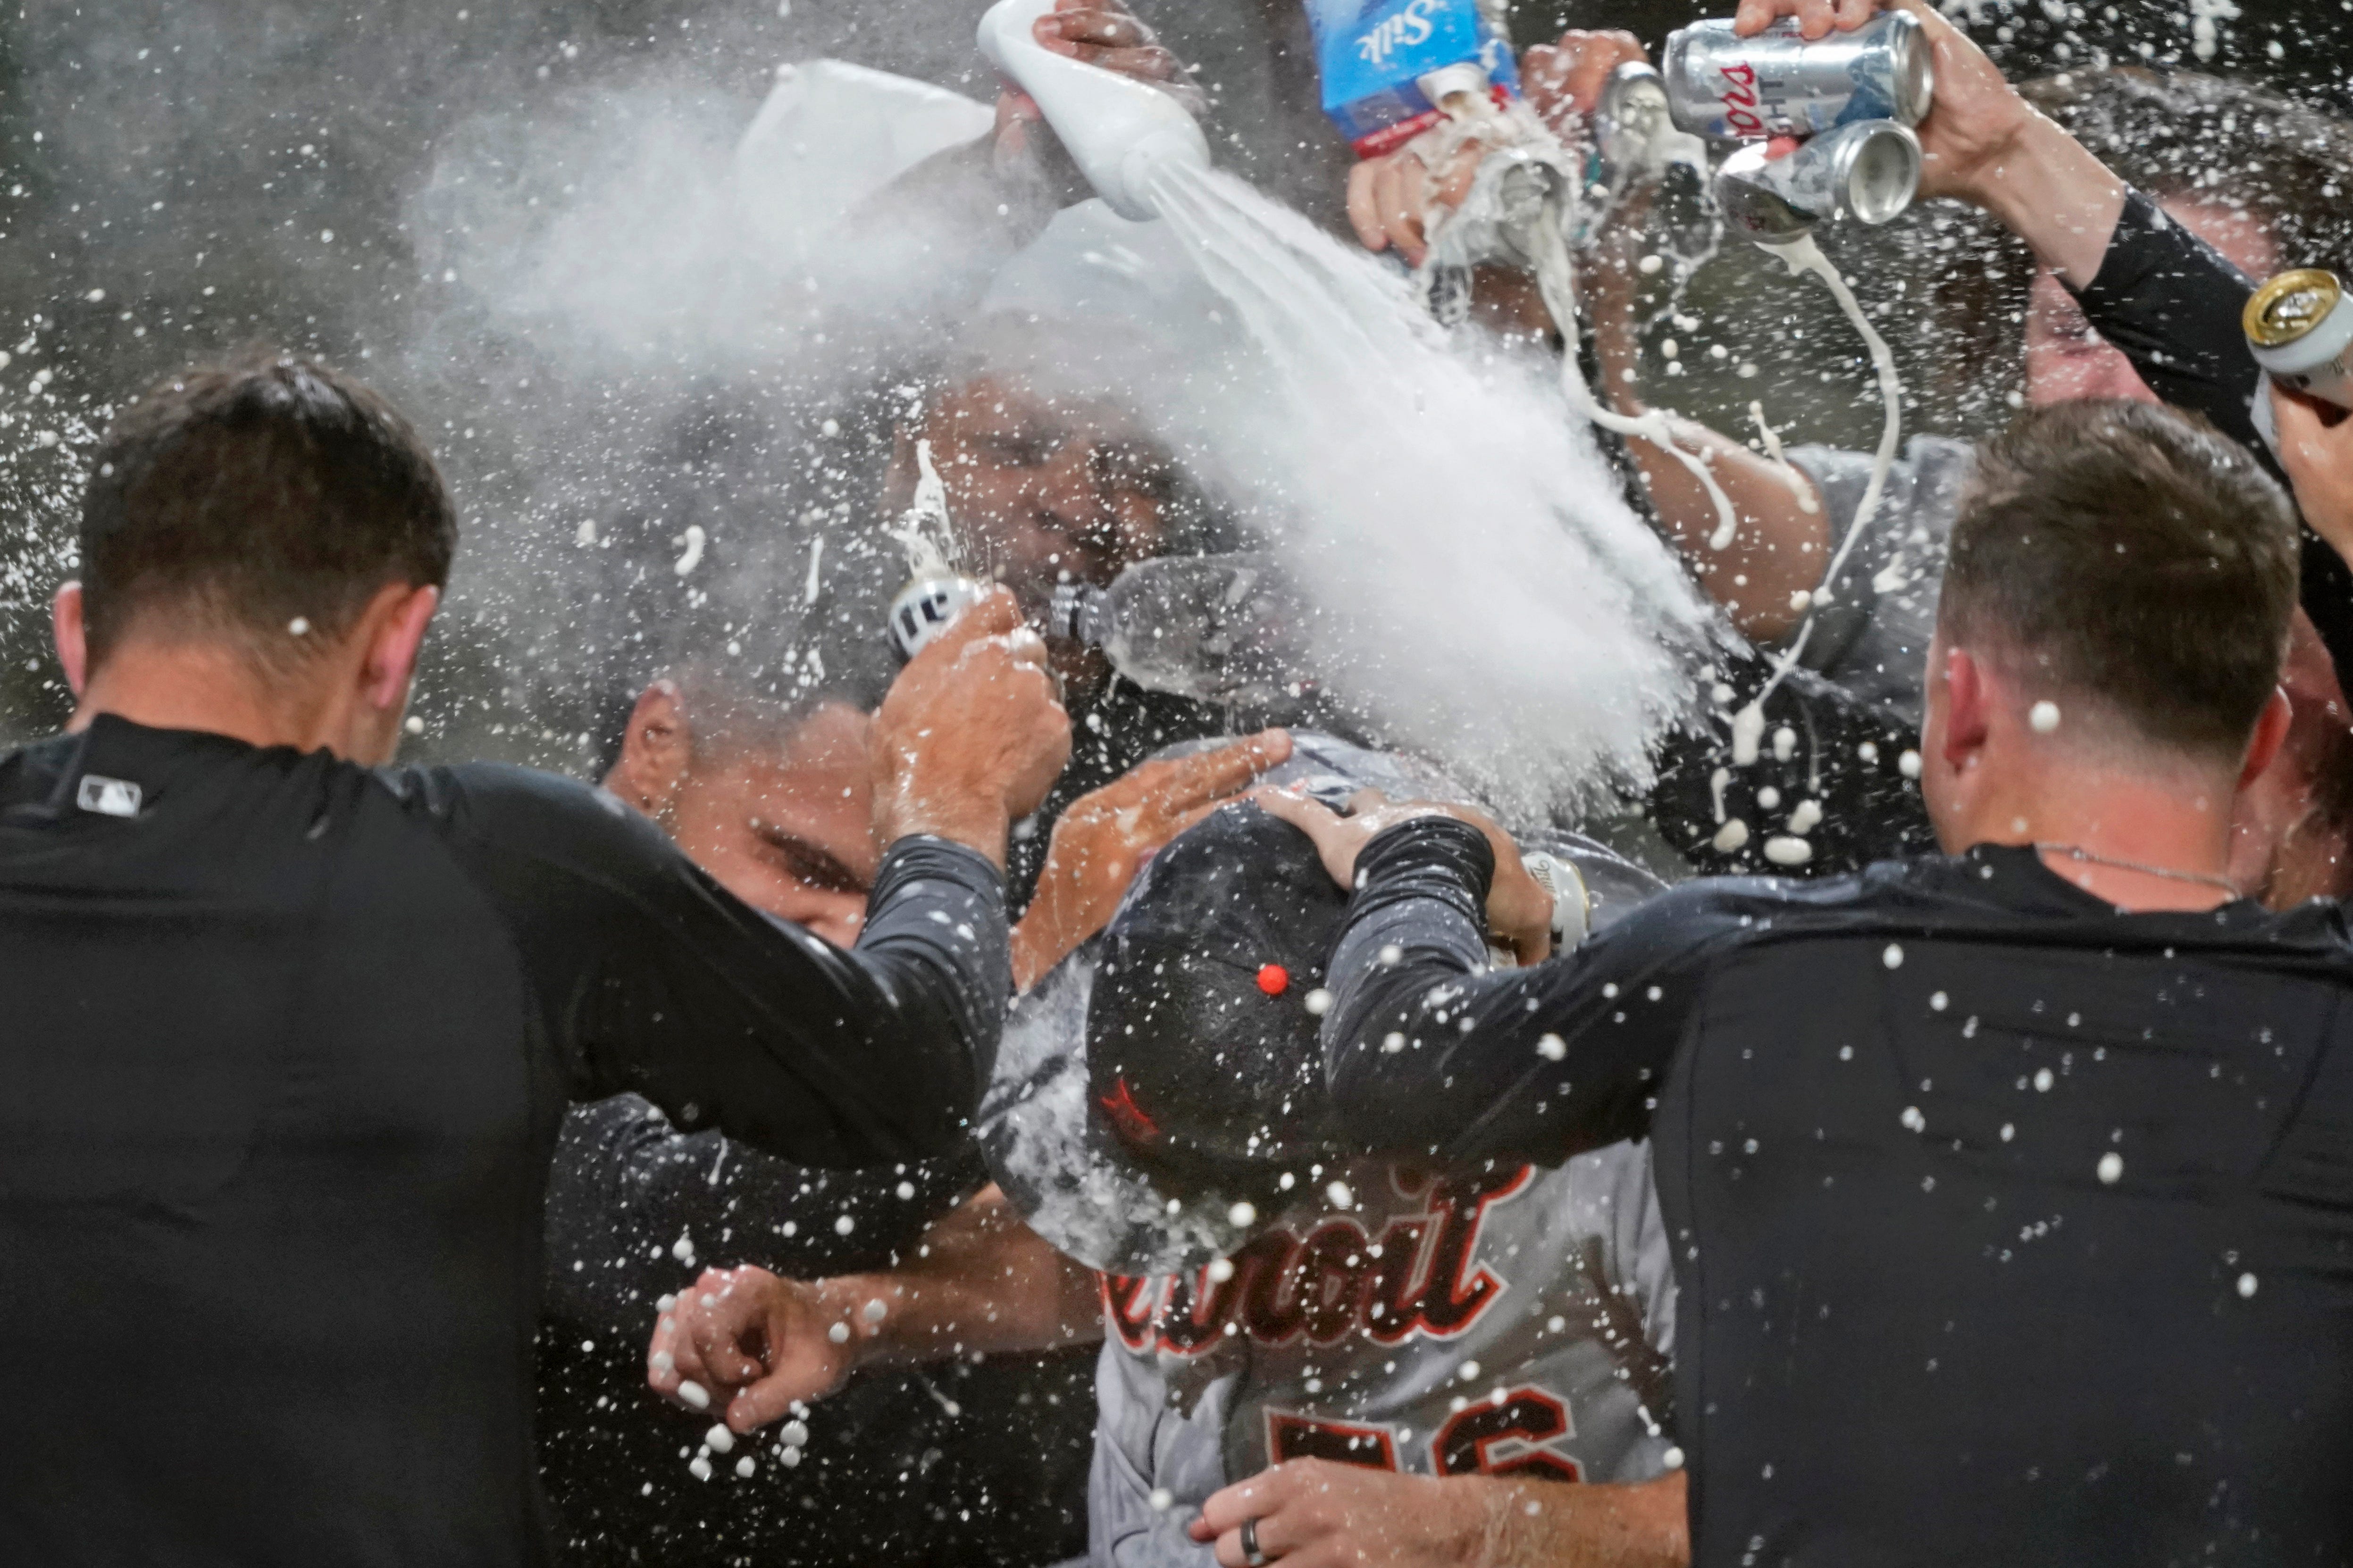 Detroit Tigers starting pitcher Spencer Turnbull is showered with beer and powder by teammates after Turnbull threw a no-hitter against the Seattle Mariners, Tuesday, May 18, 2021, in Seattle.